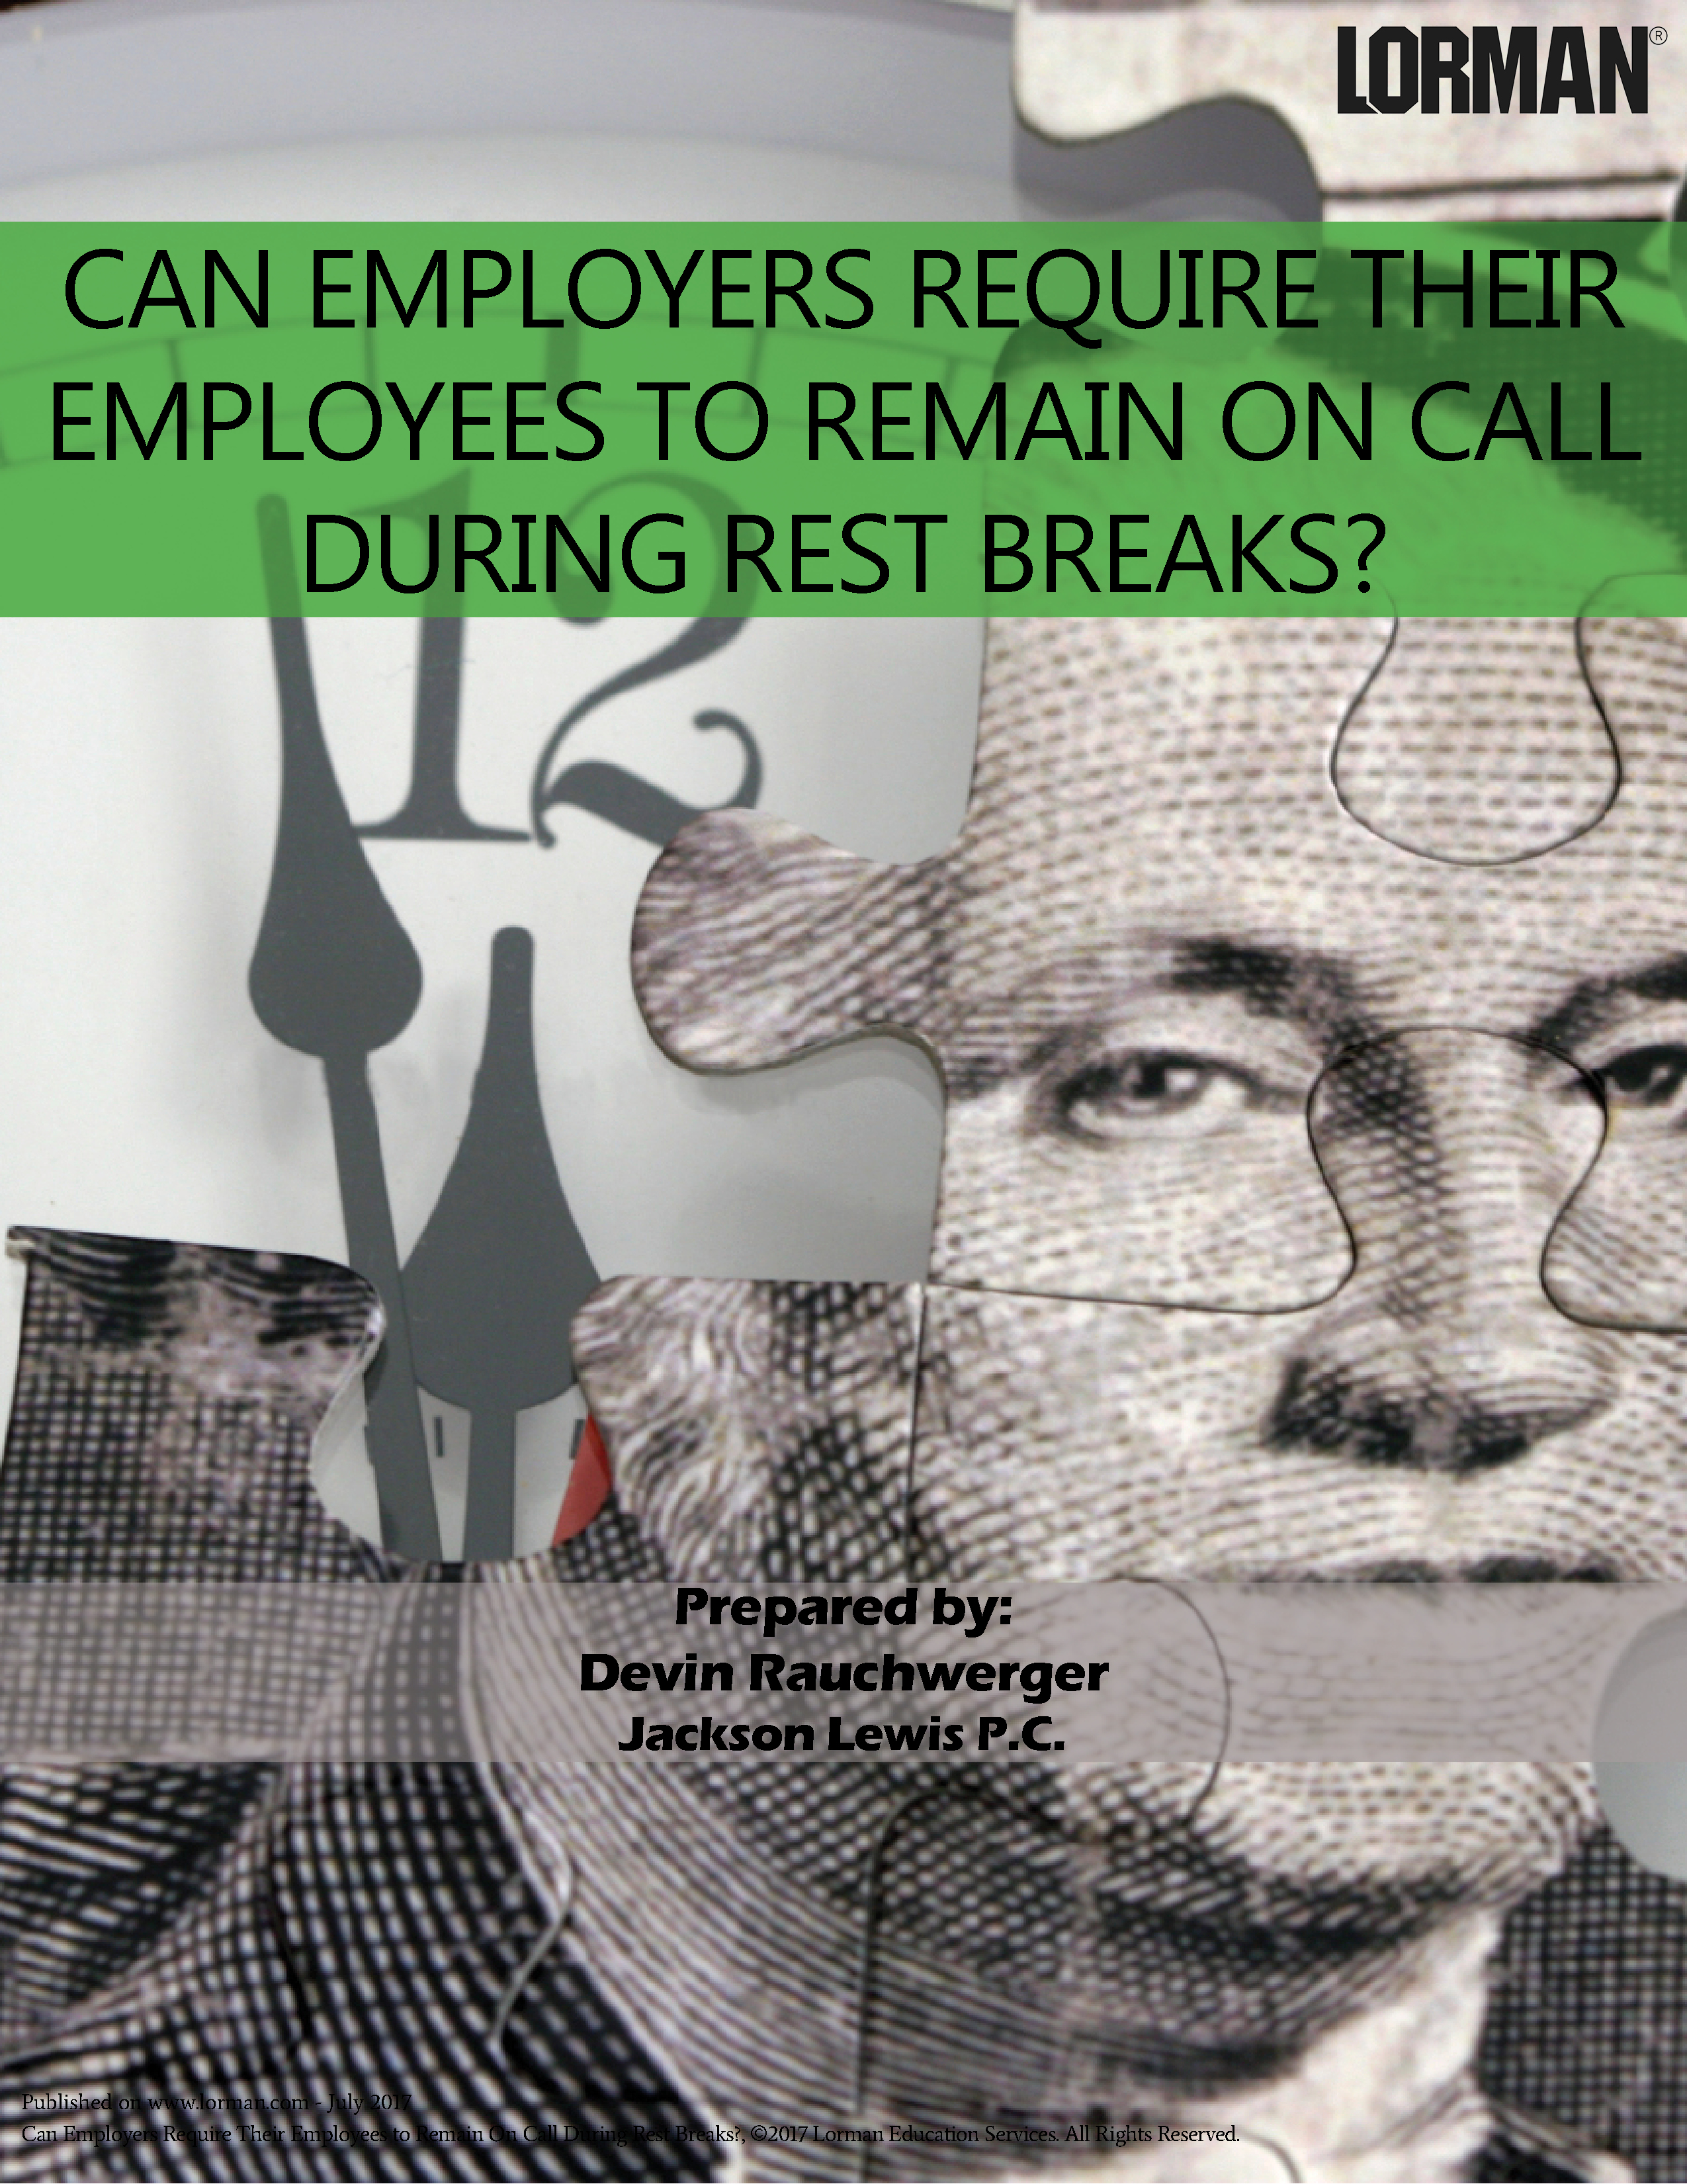 Can Employers Require Their Employees to Remain On Call During Rest Breaks?